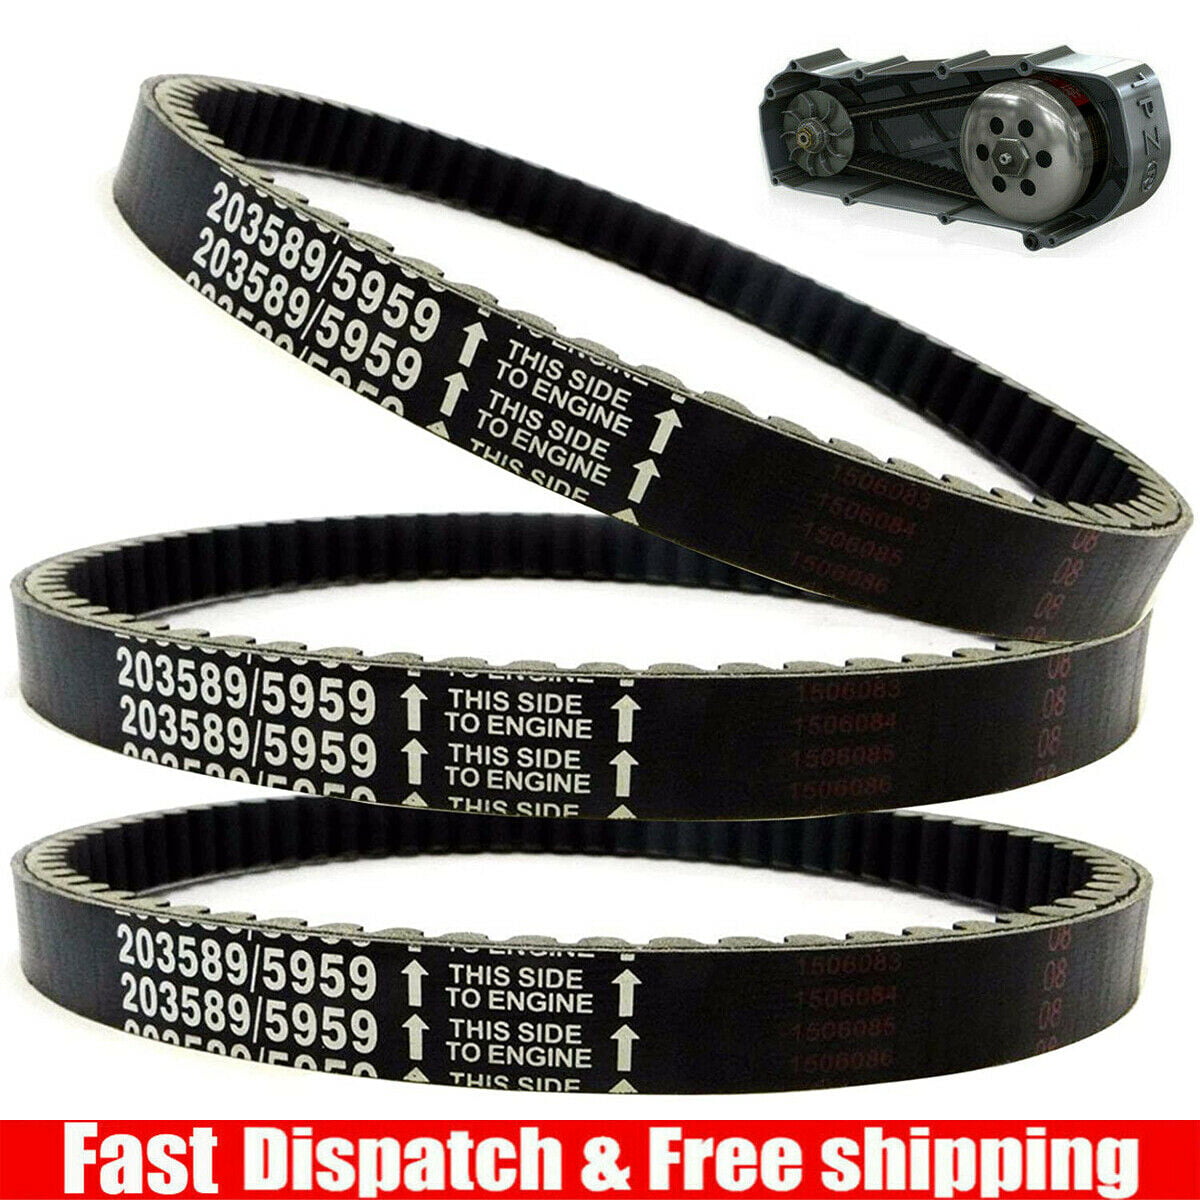 3x Rubber Go Kart Drive Belt 30 Series Replacement For Manco 5959 Comet 203589 